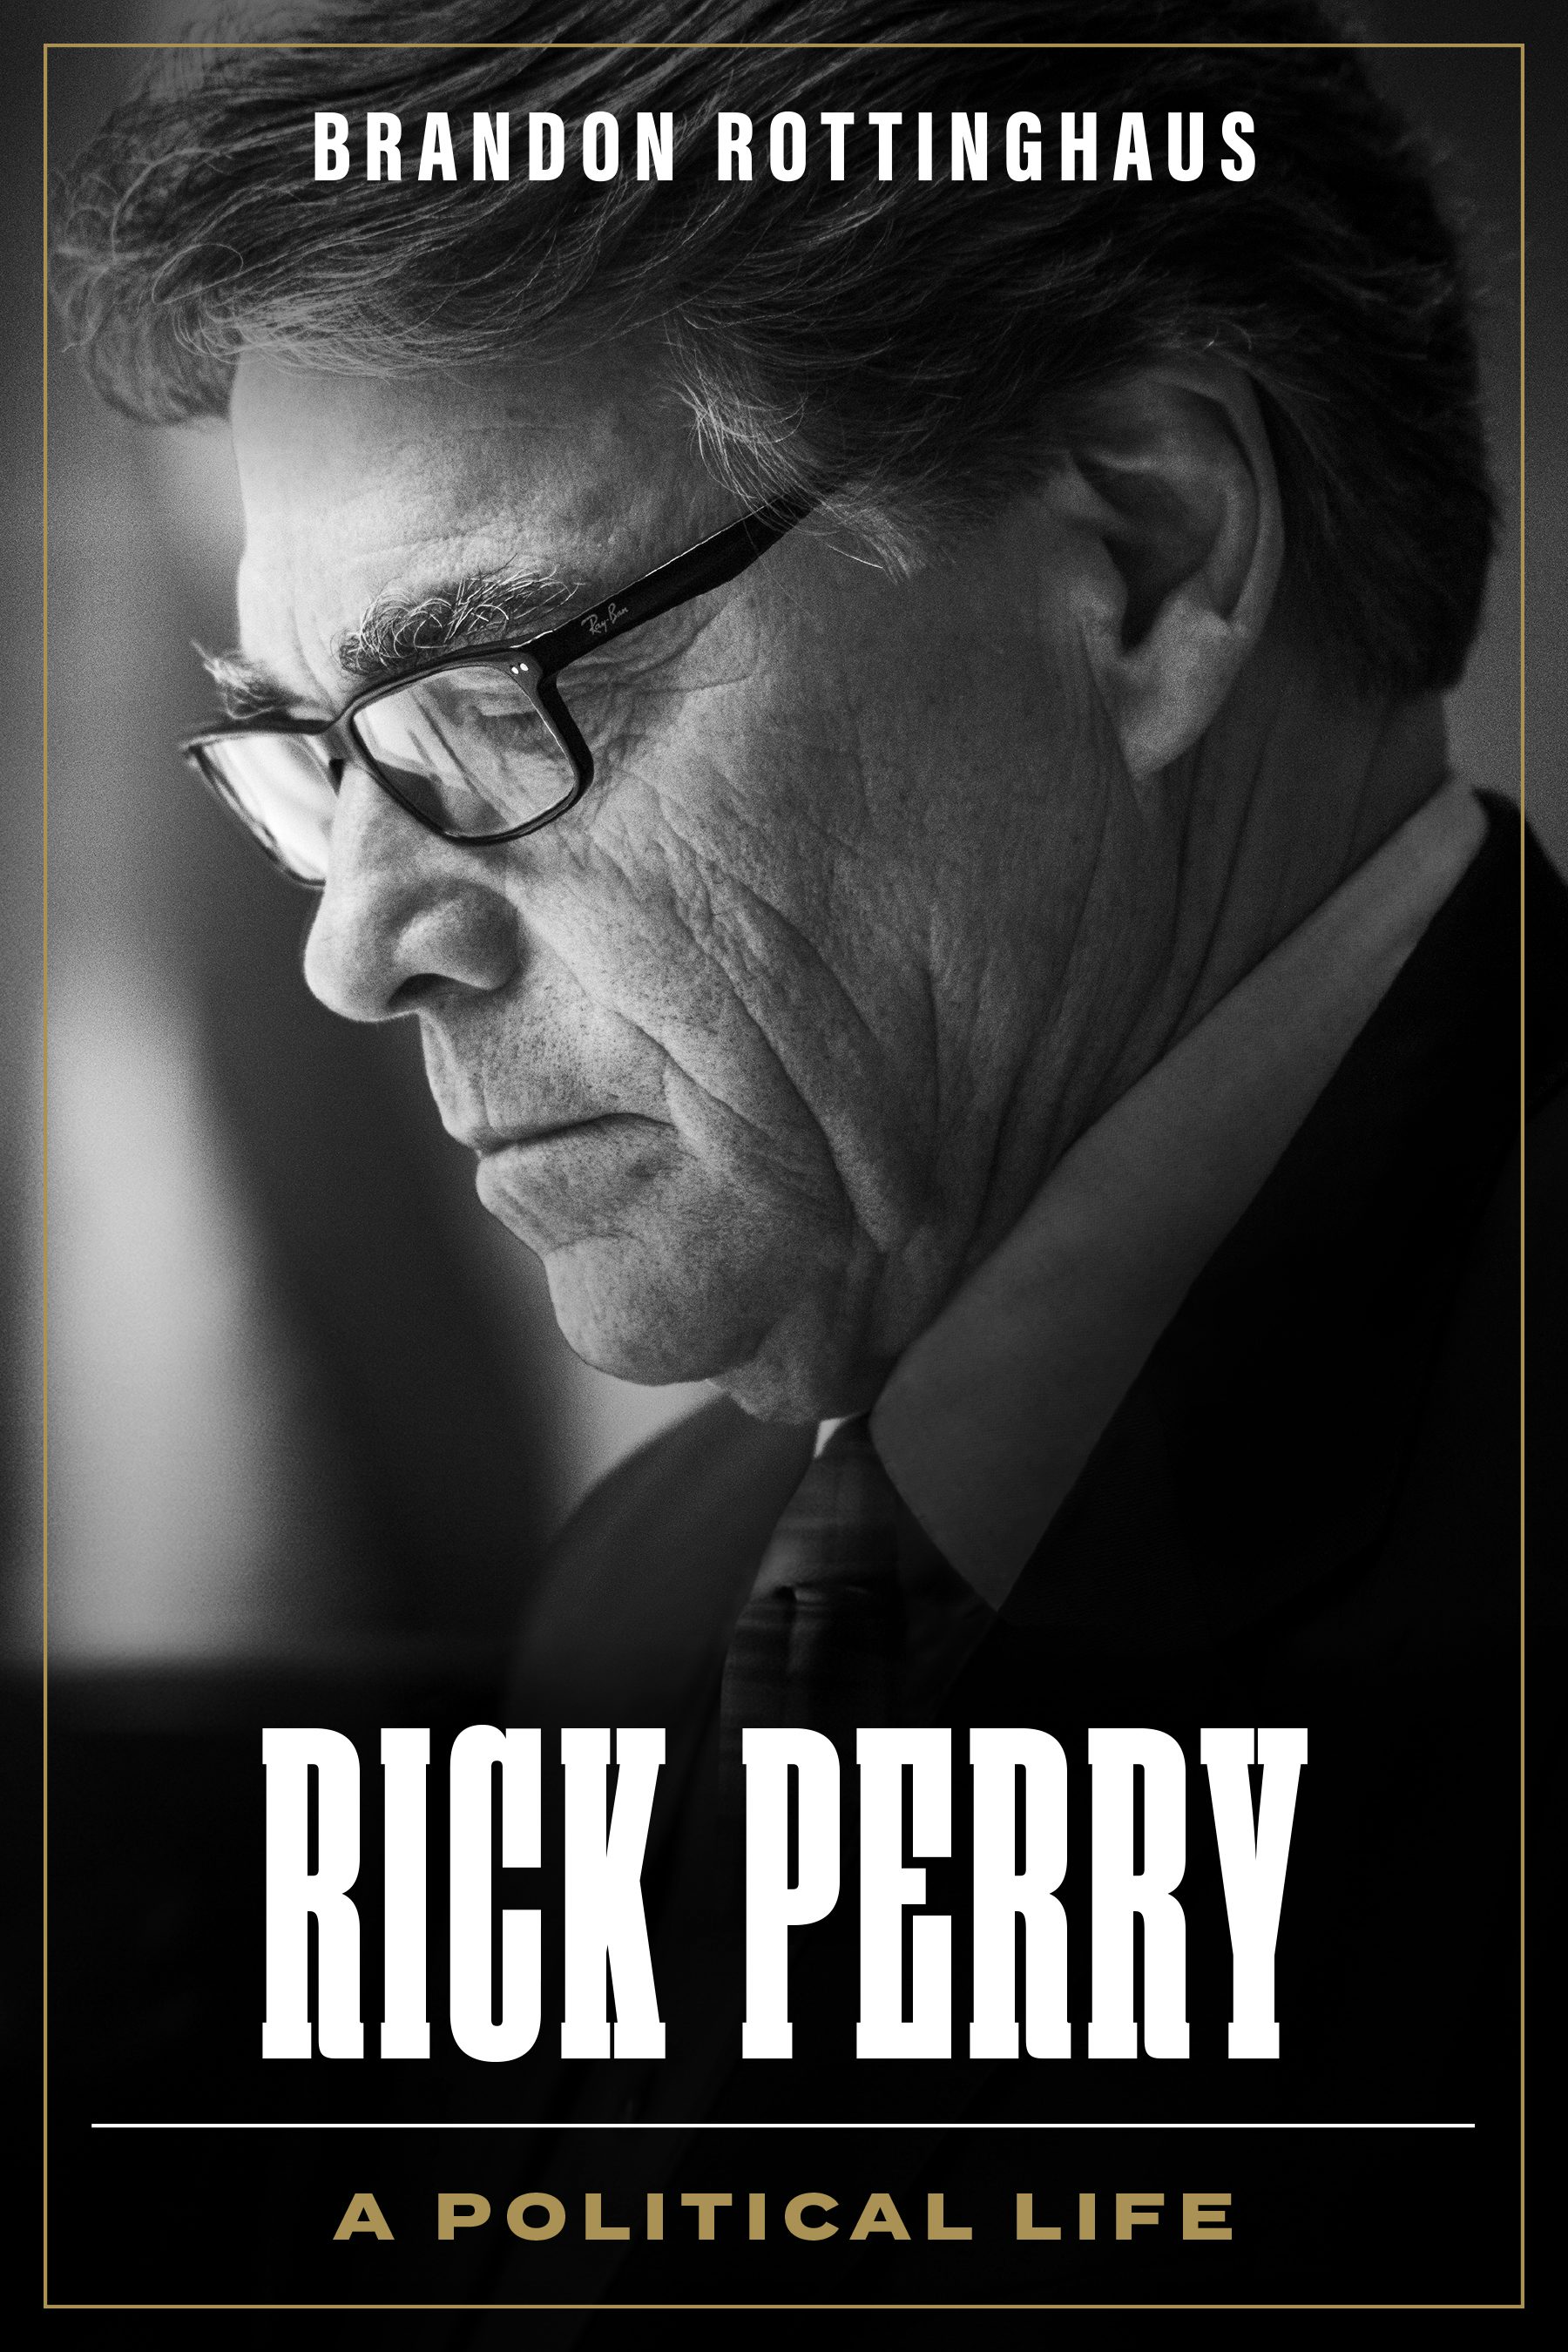 Rick Perry: A Political Life by Brandon Rottinghaus